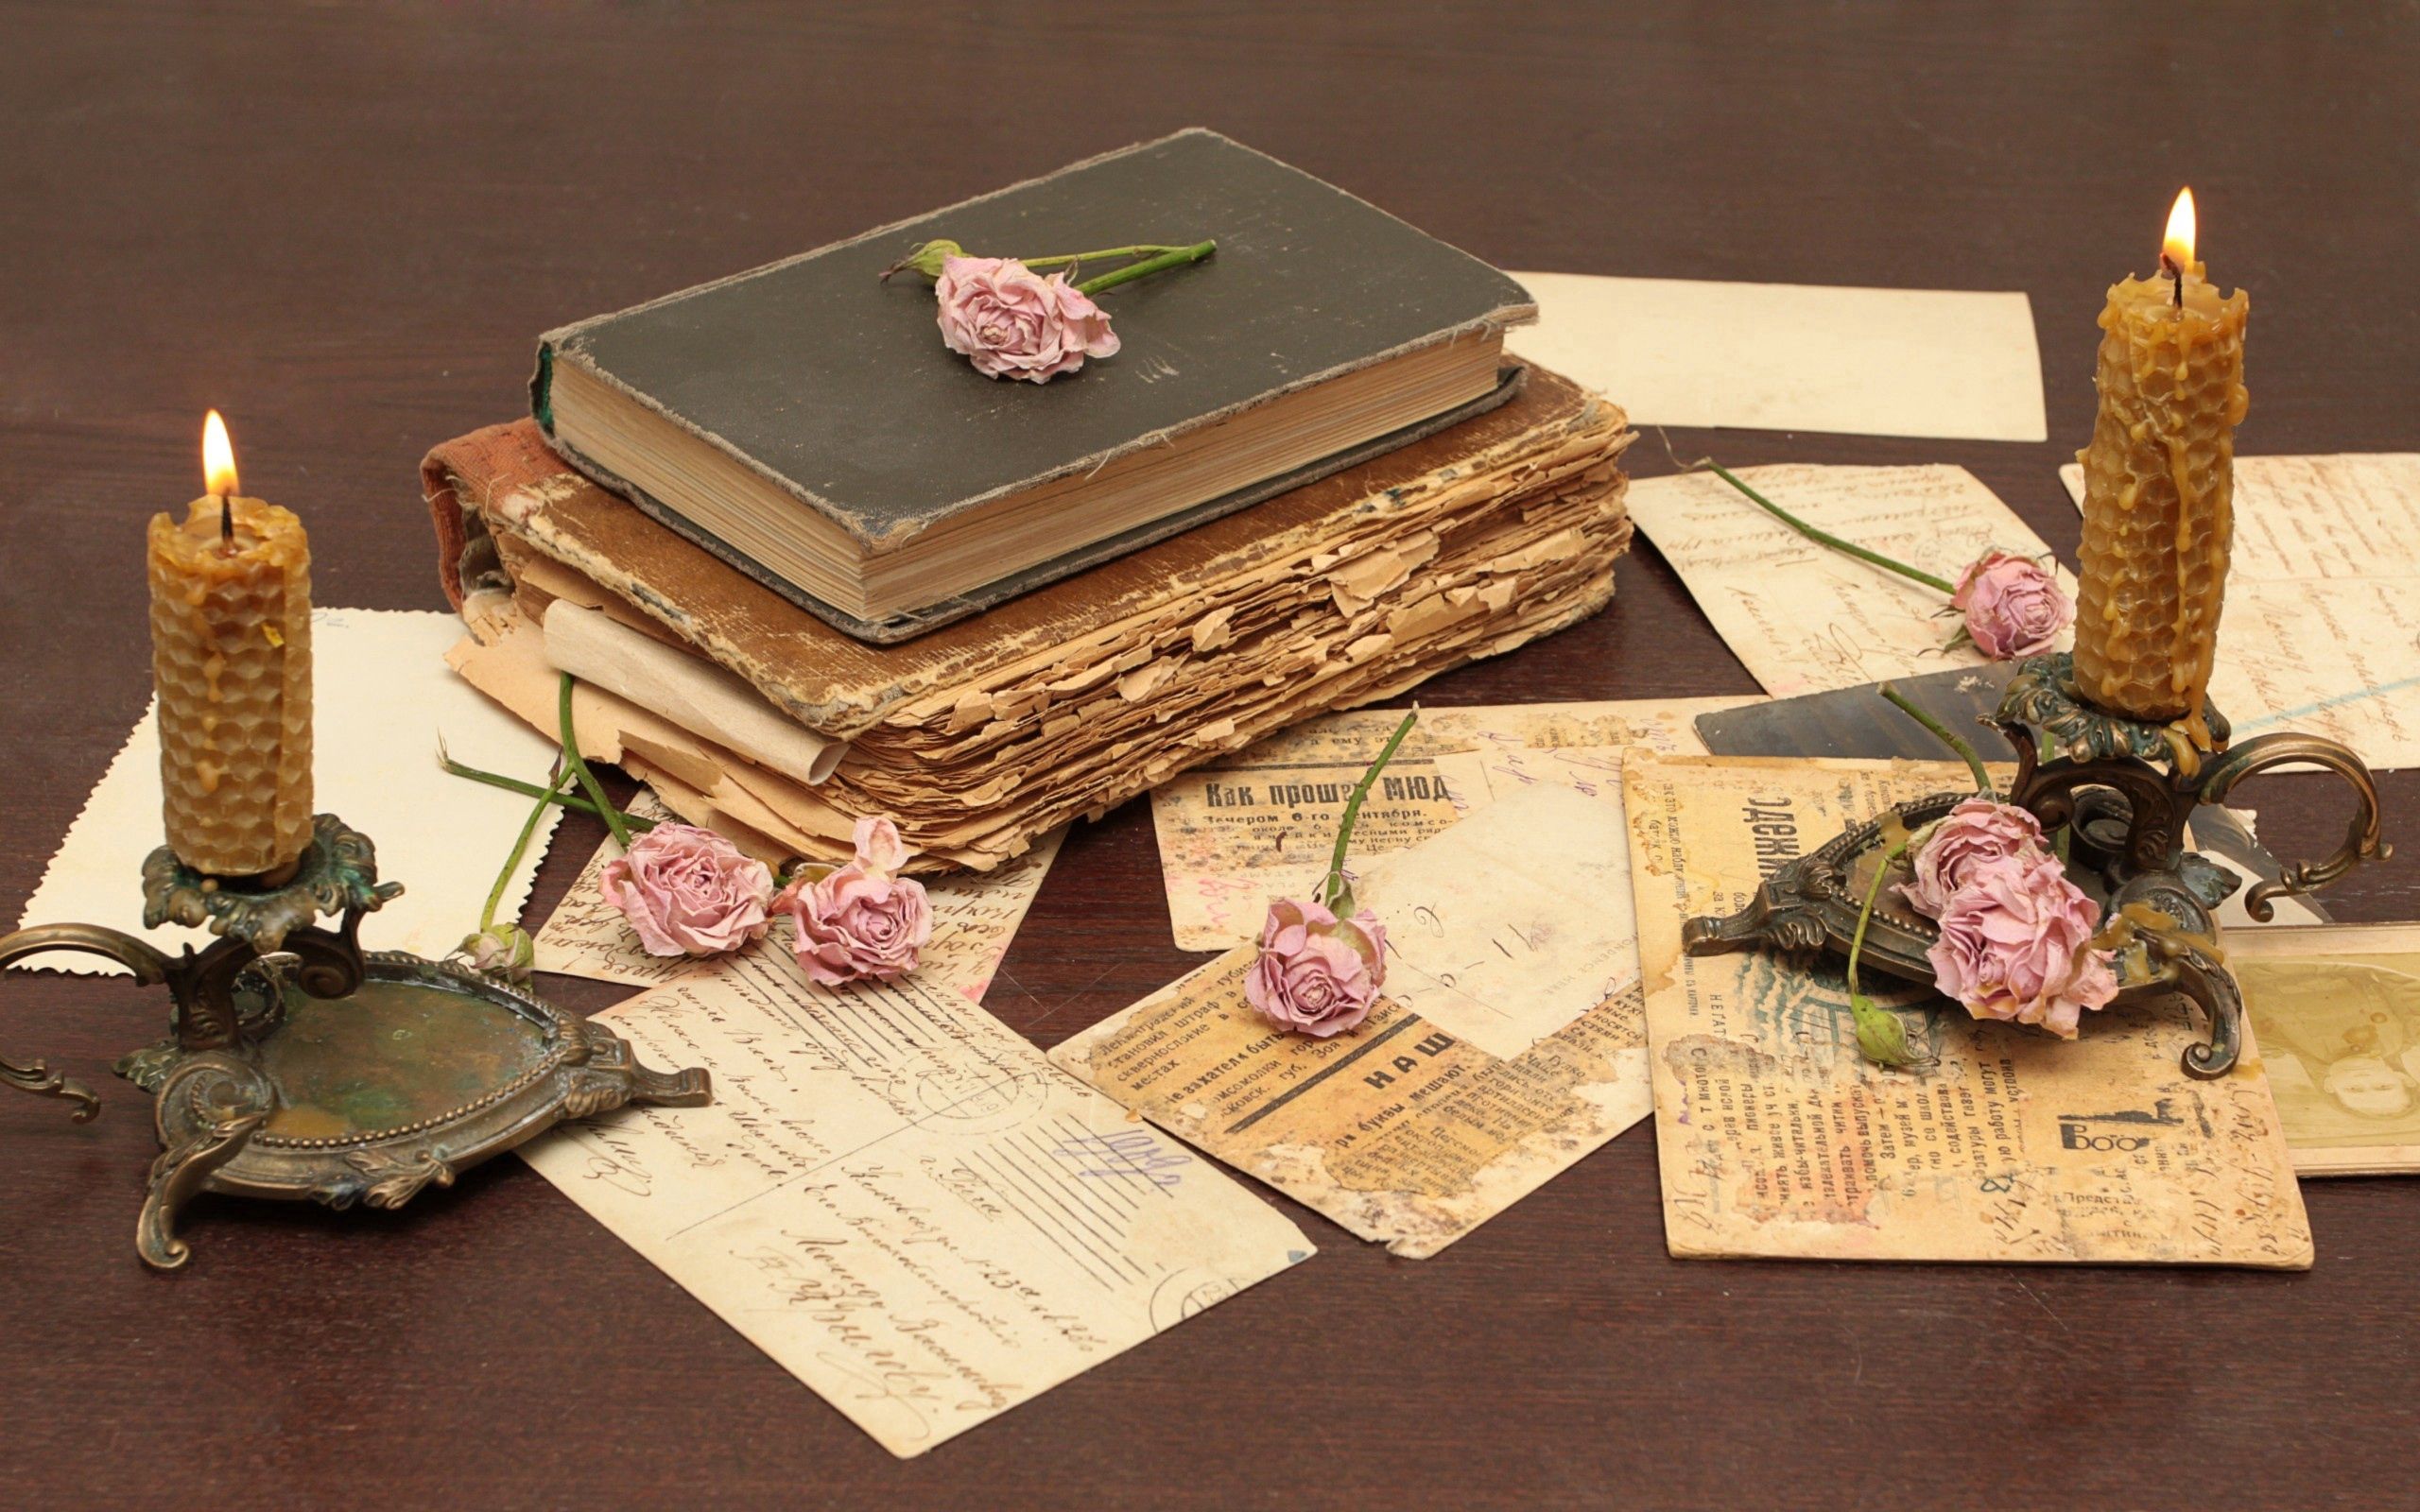 books, ancient, flowers, miscellanea, miscellaneous, old, table